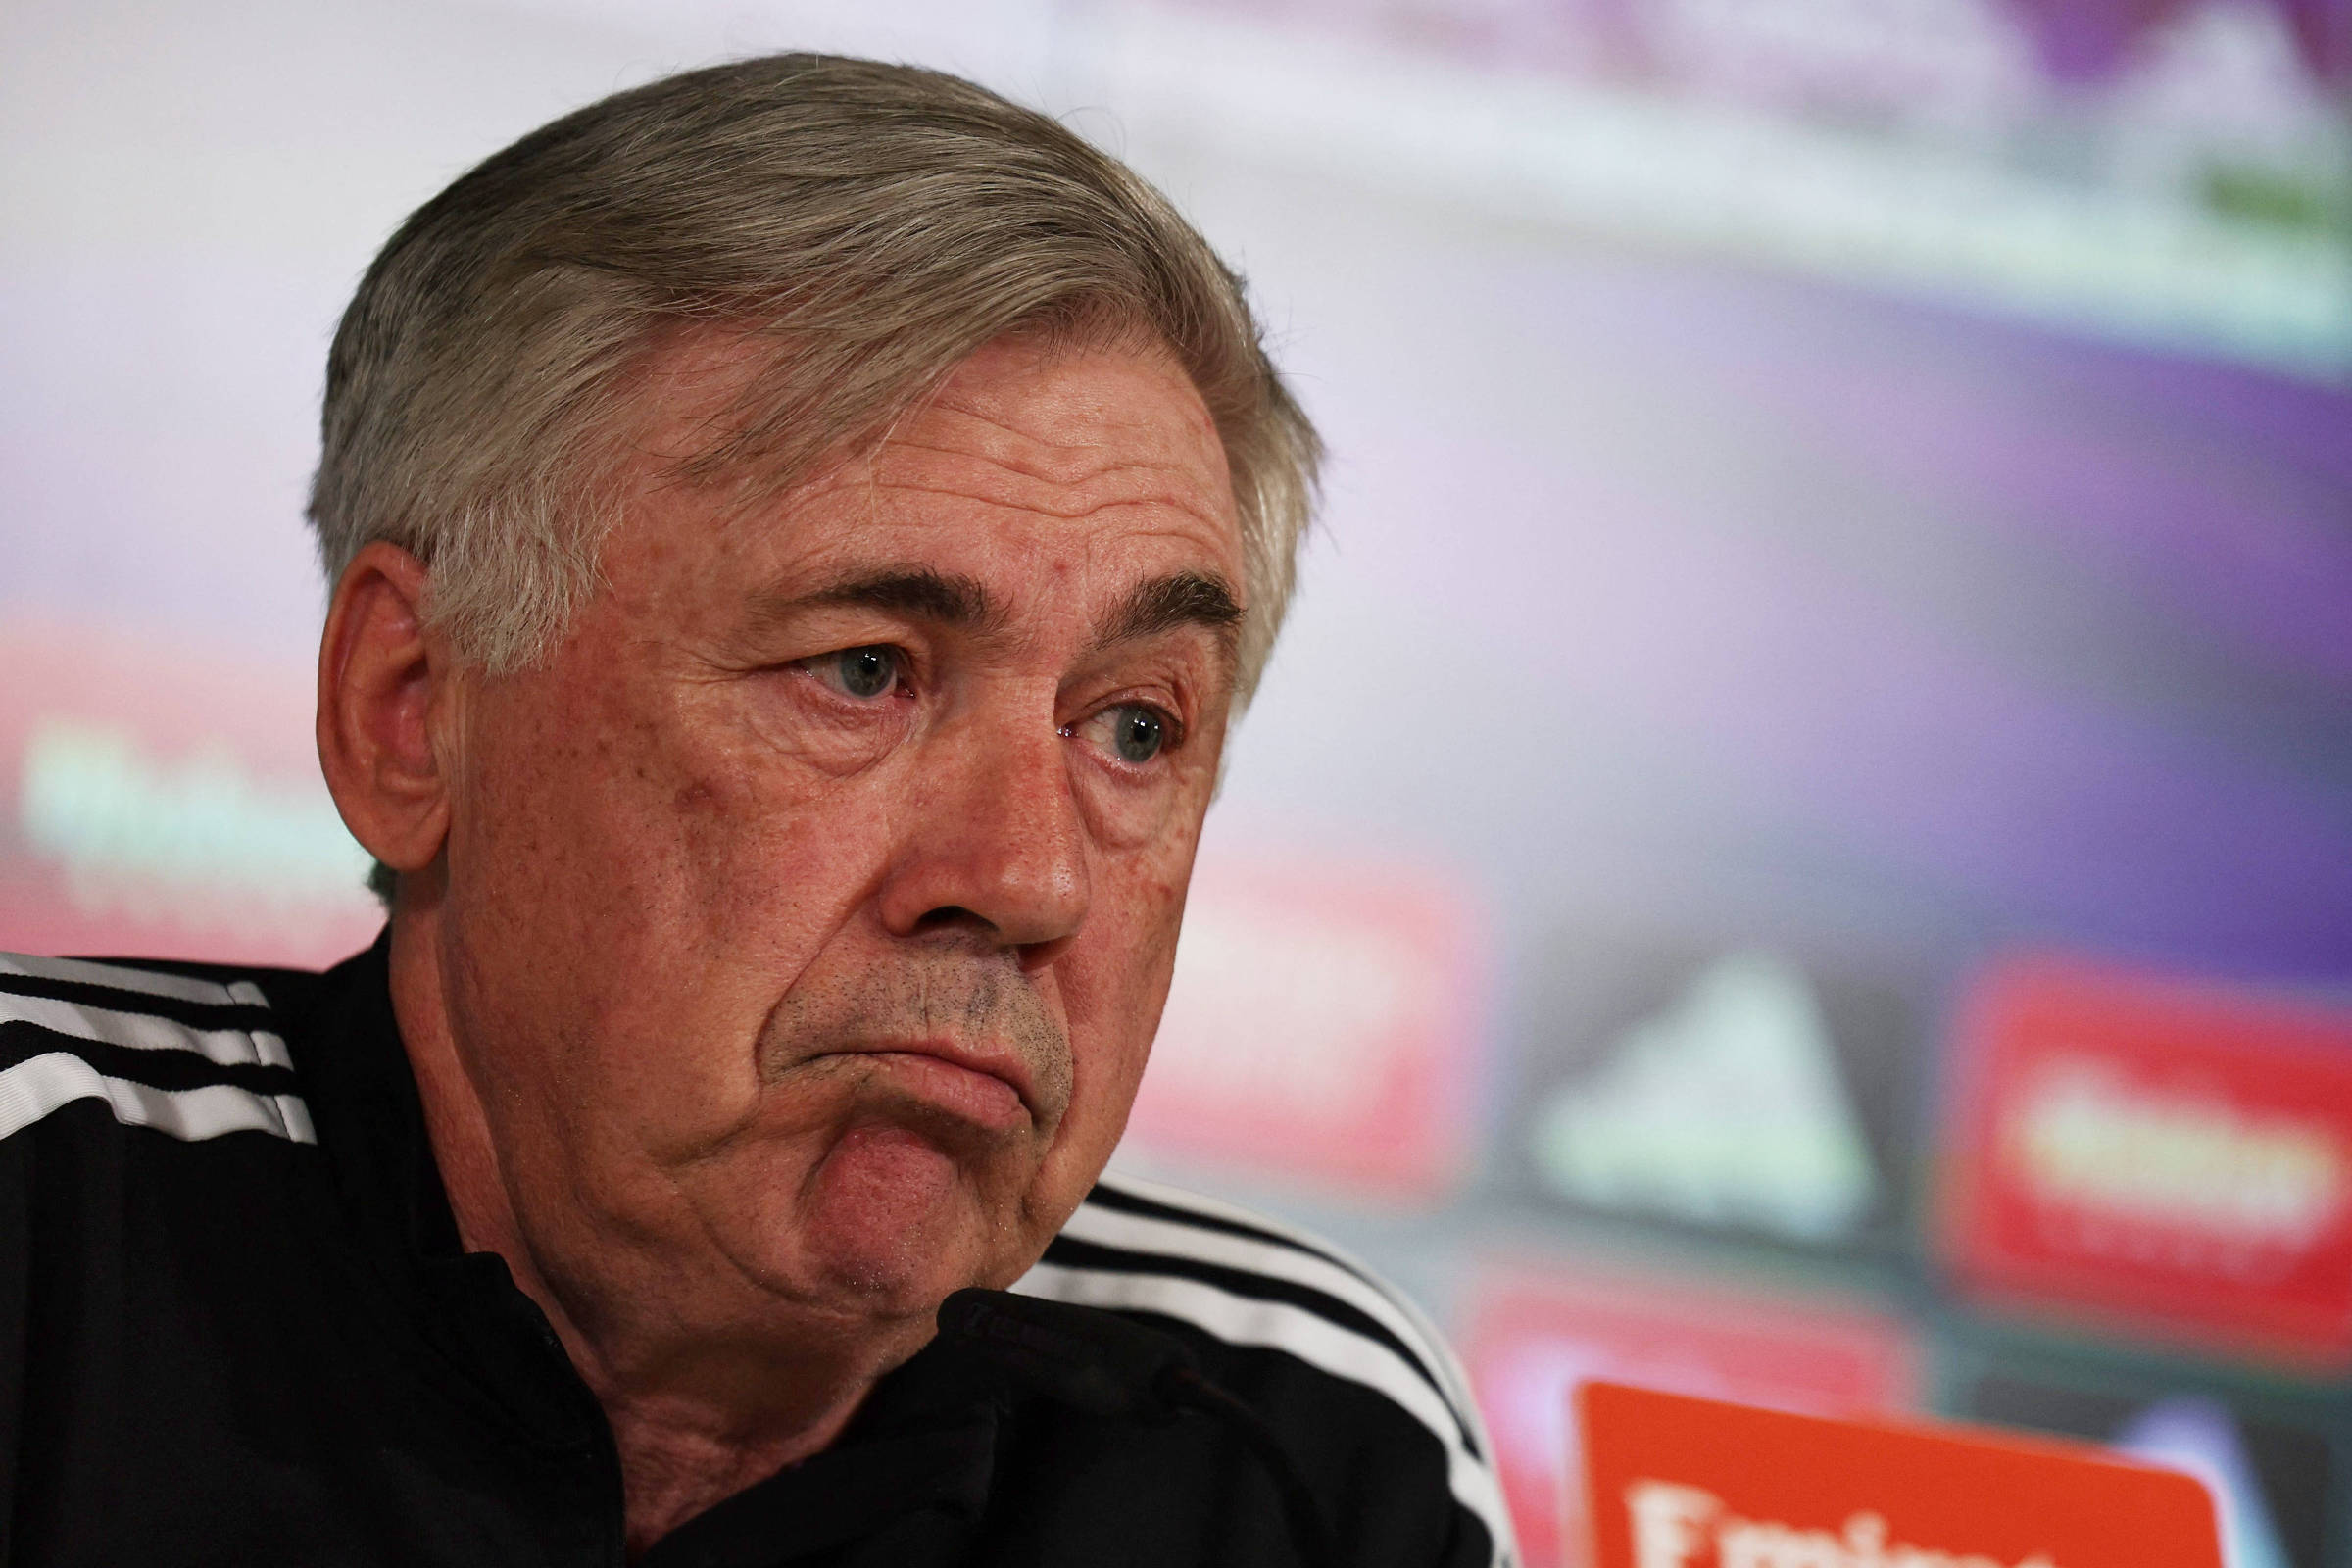 Nothing is definitive in the career of Ancelotti, chosen as the new coach of the national team